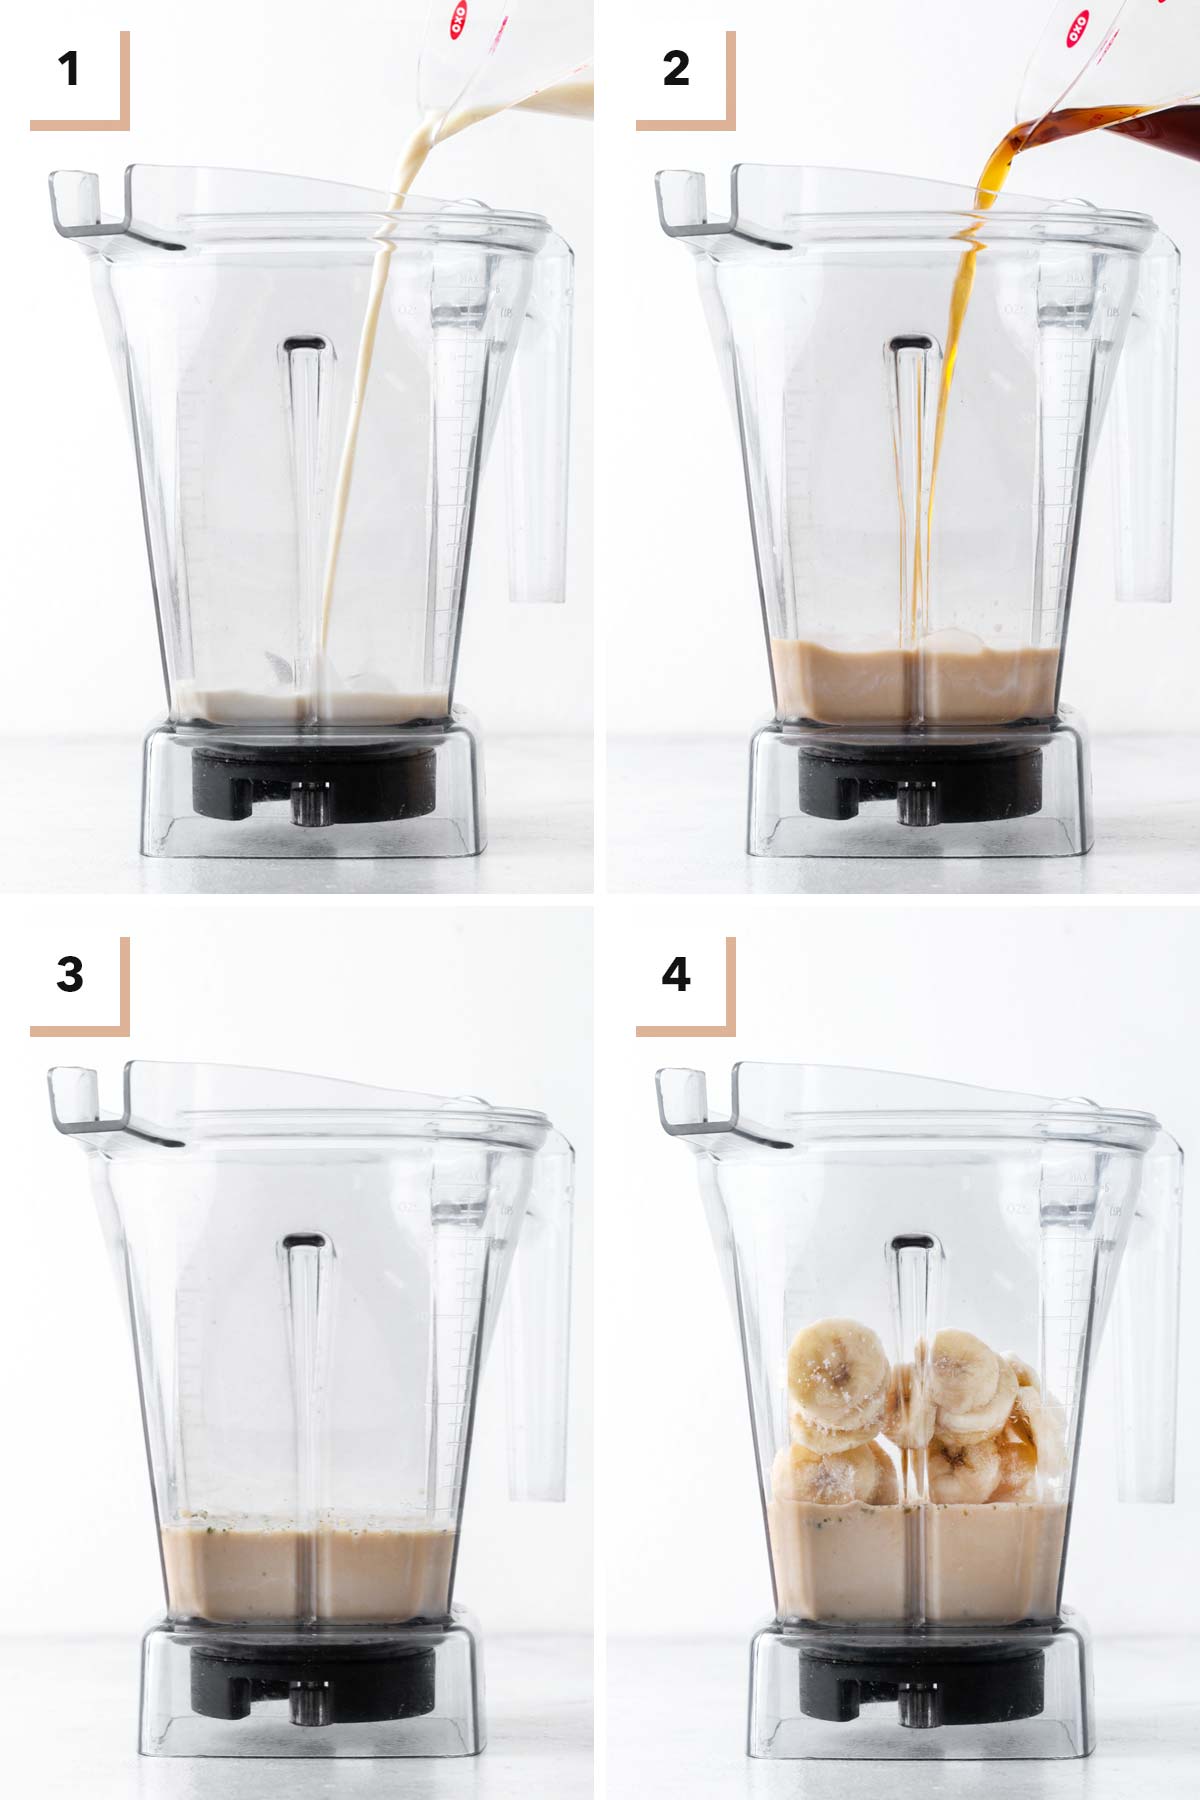 Steps for making a coffee smoothie.